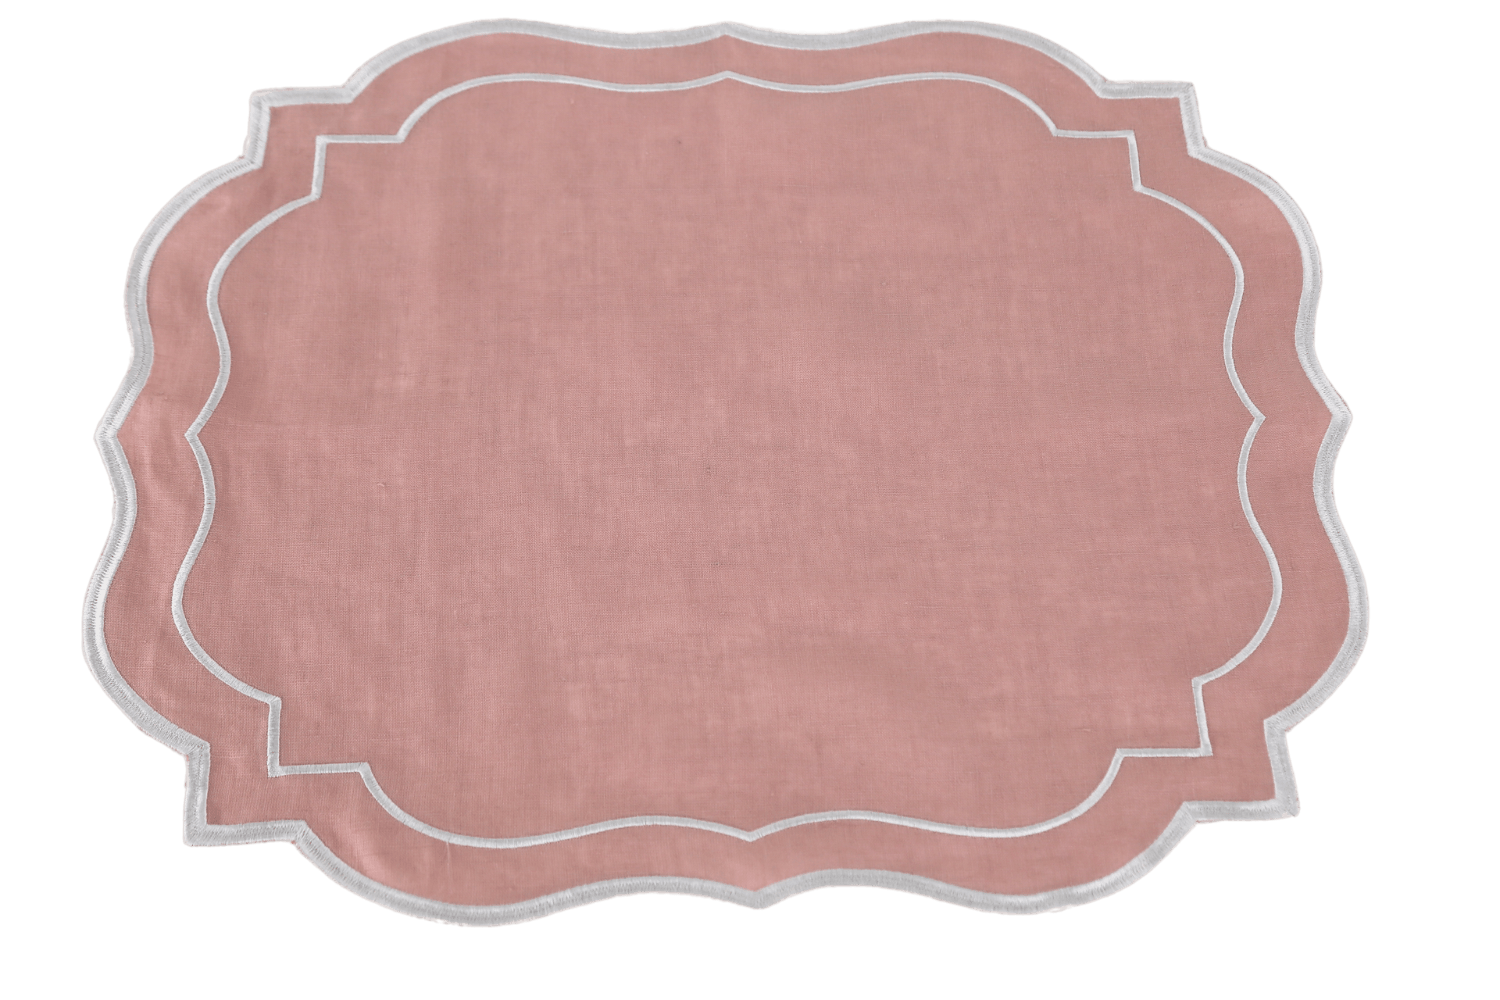 Scalloped linen placemats, set of 4, for elegant table setups. Made of premium flax linen, ironing recommended. 38 x 38cm.